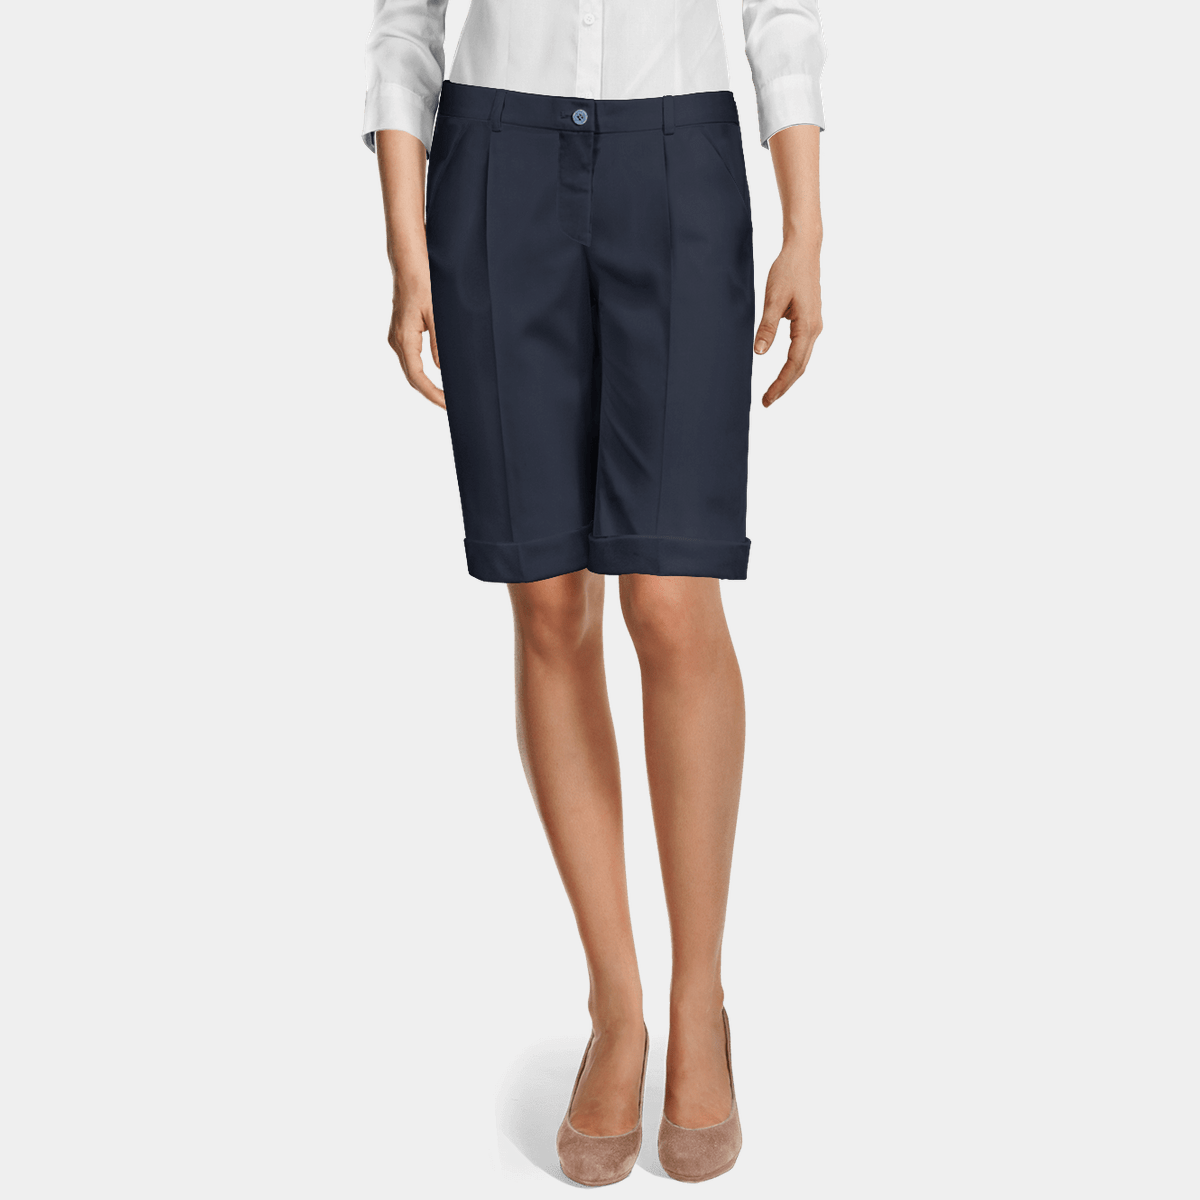 How to Wear Bermuda Shorts for Women in 2023 - Sumissura